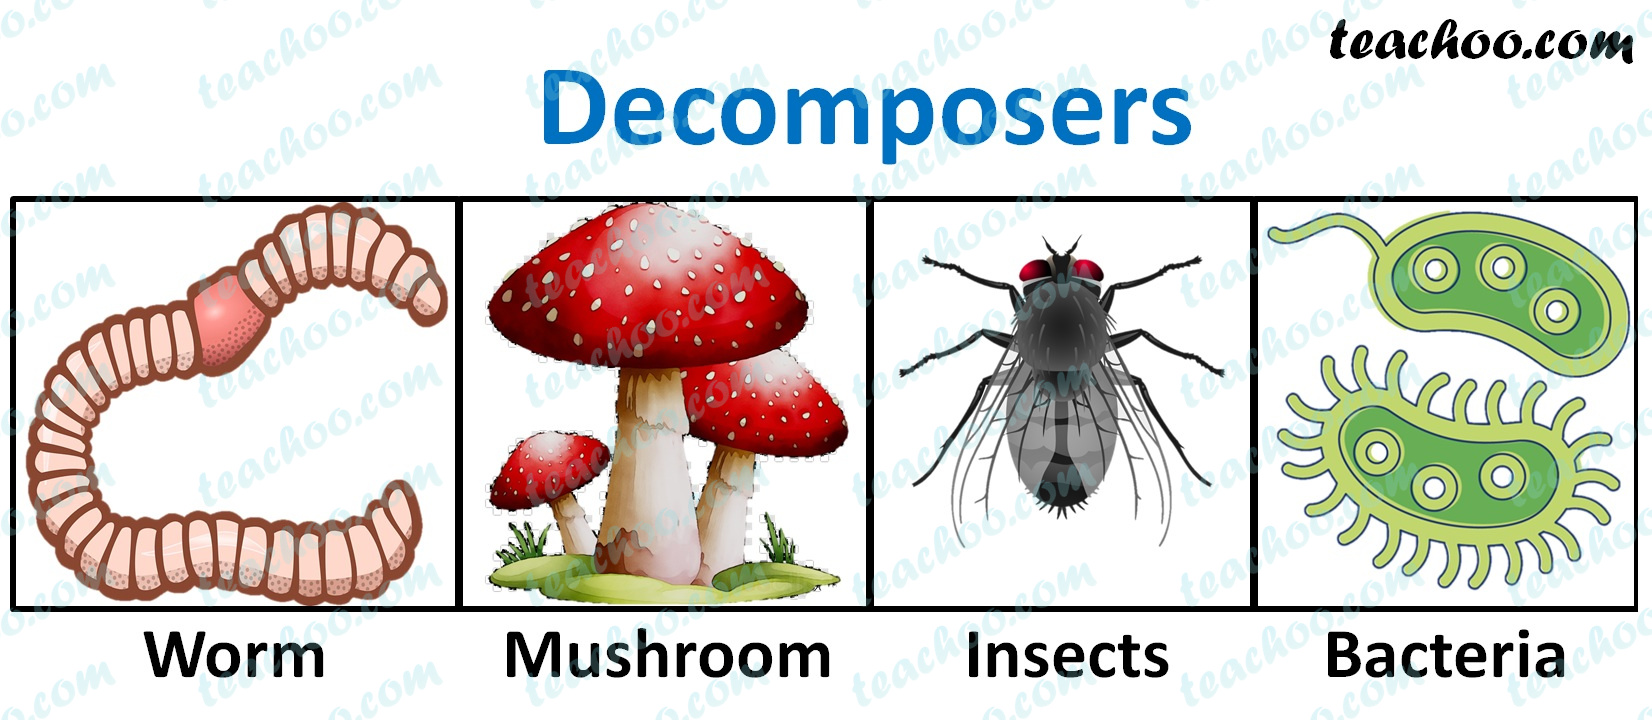 Q2 Page 260 - What is the role of decomposers in the ecosystem?